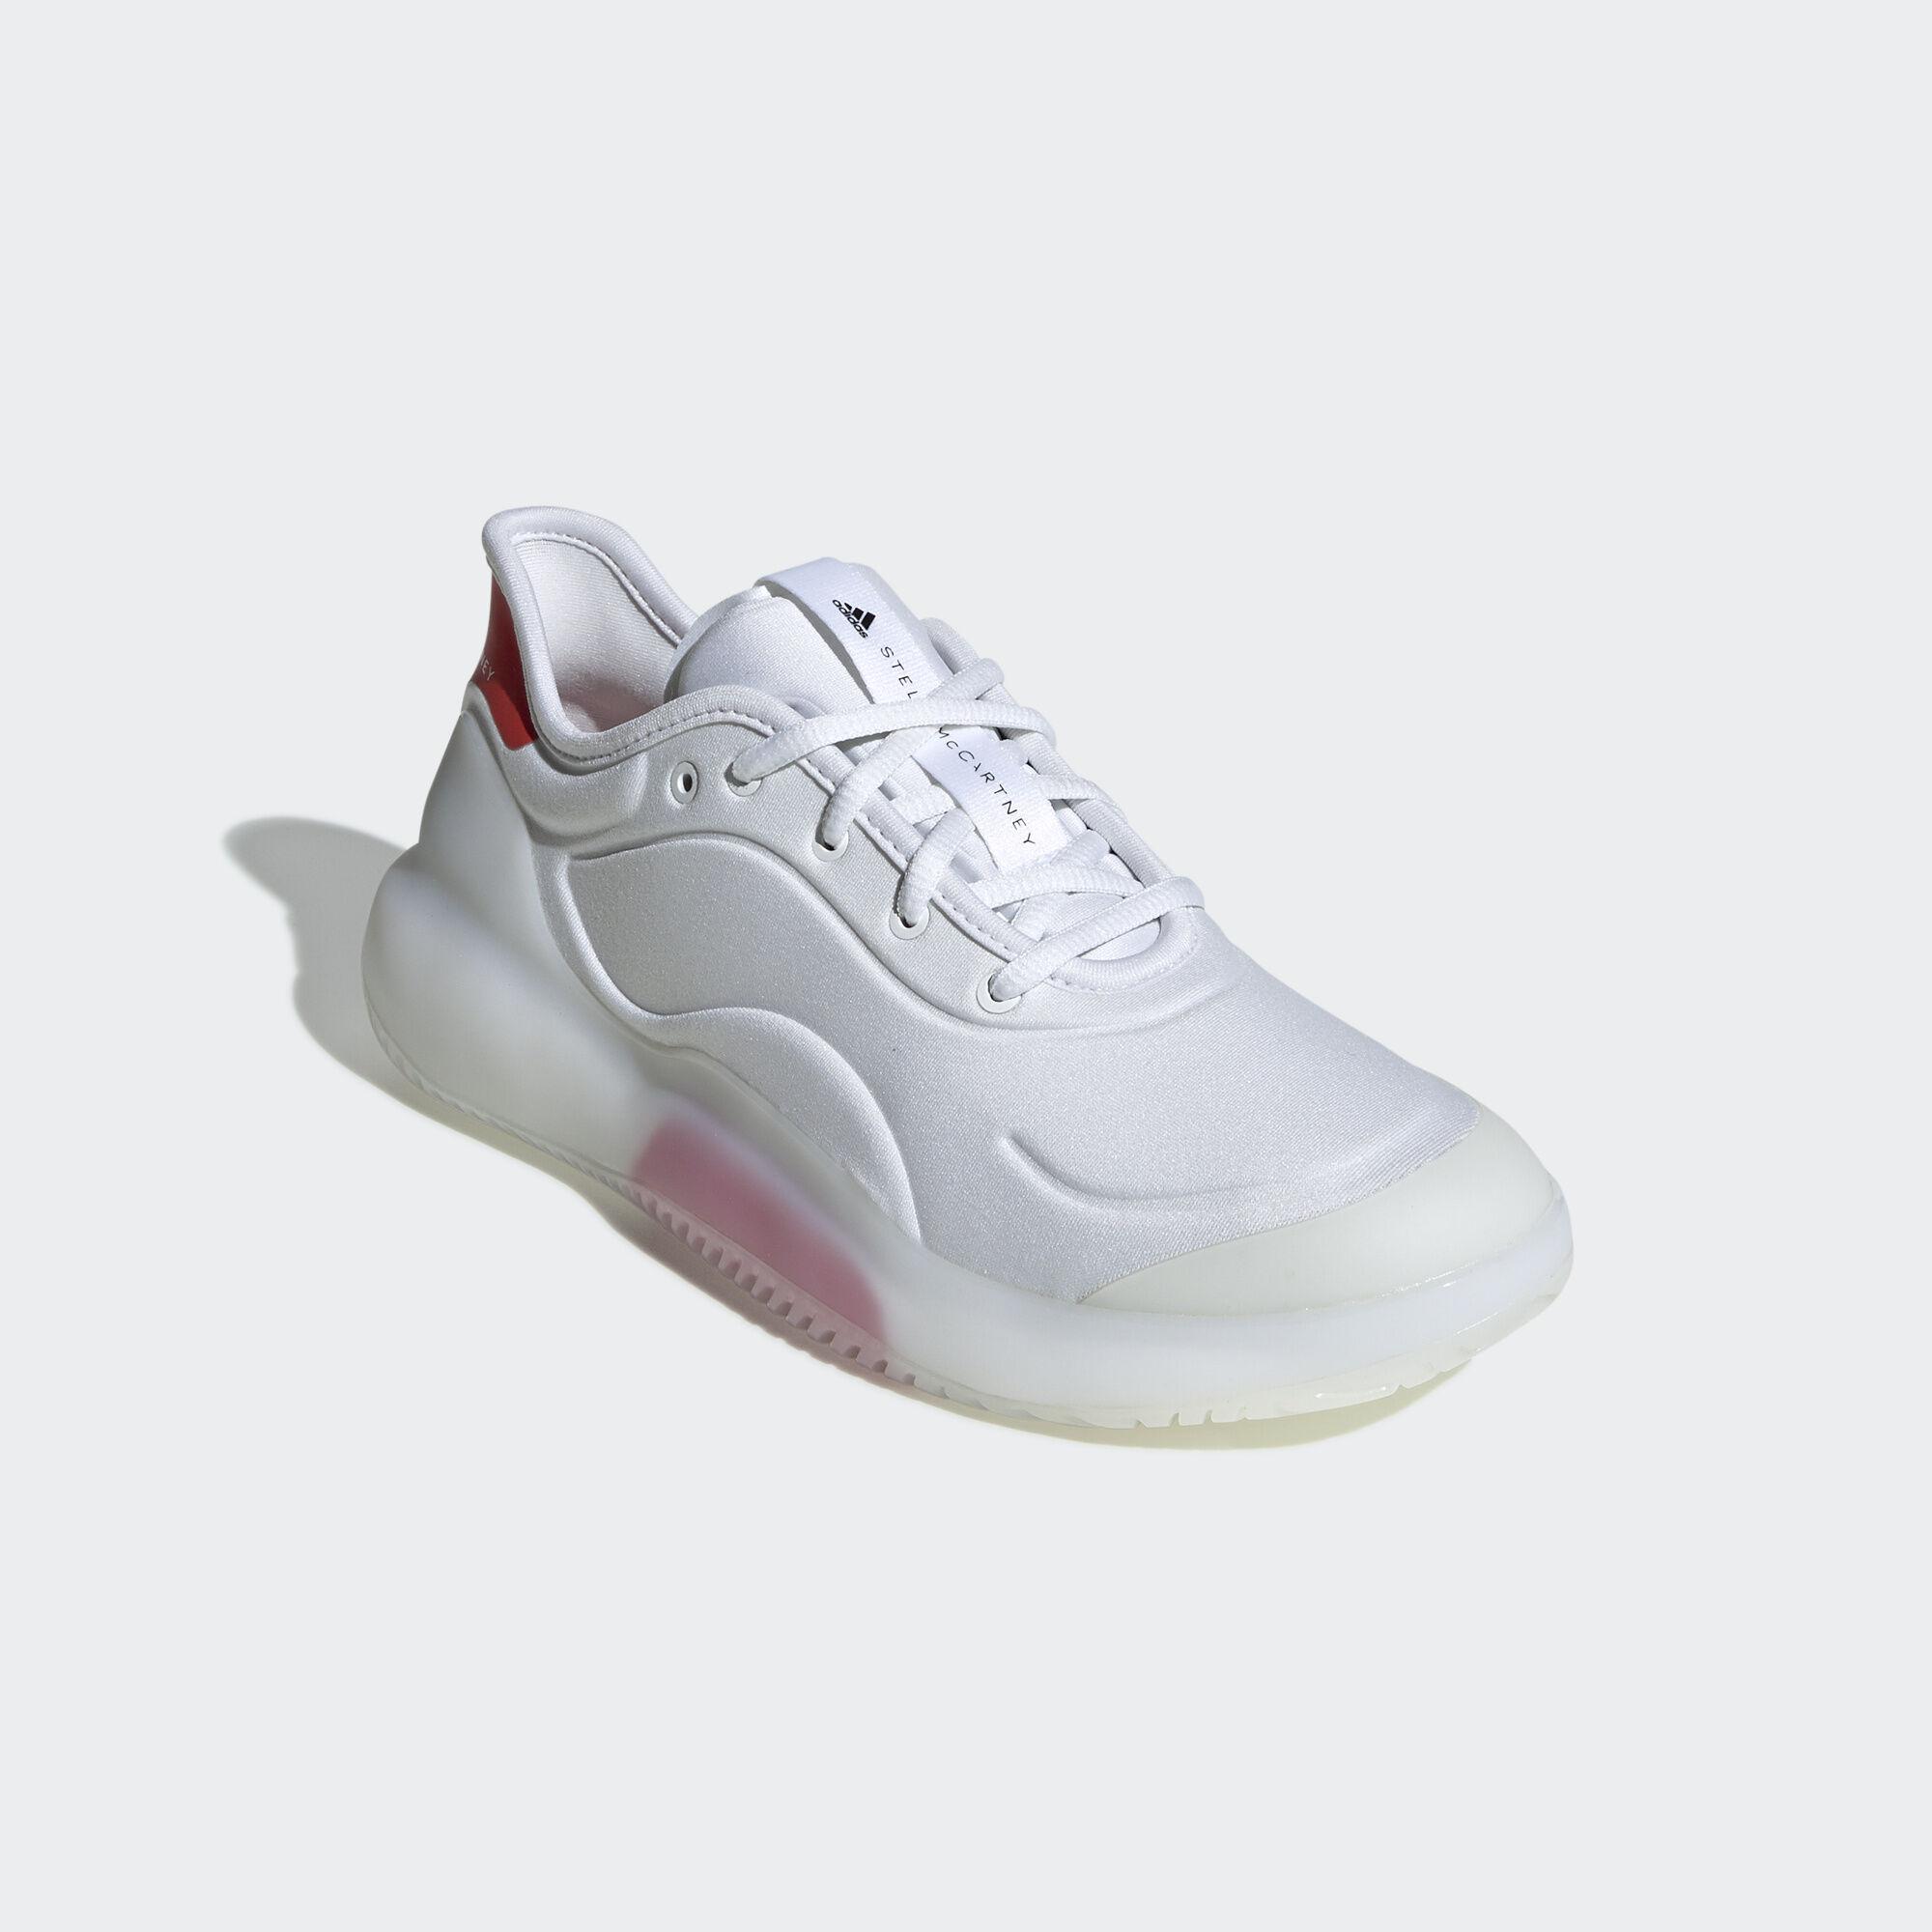 Adidas Womens Stella McCartney Court Boost Tennis Shoes - White/Active ...